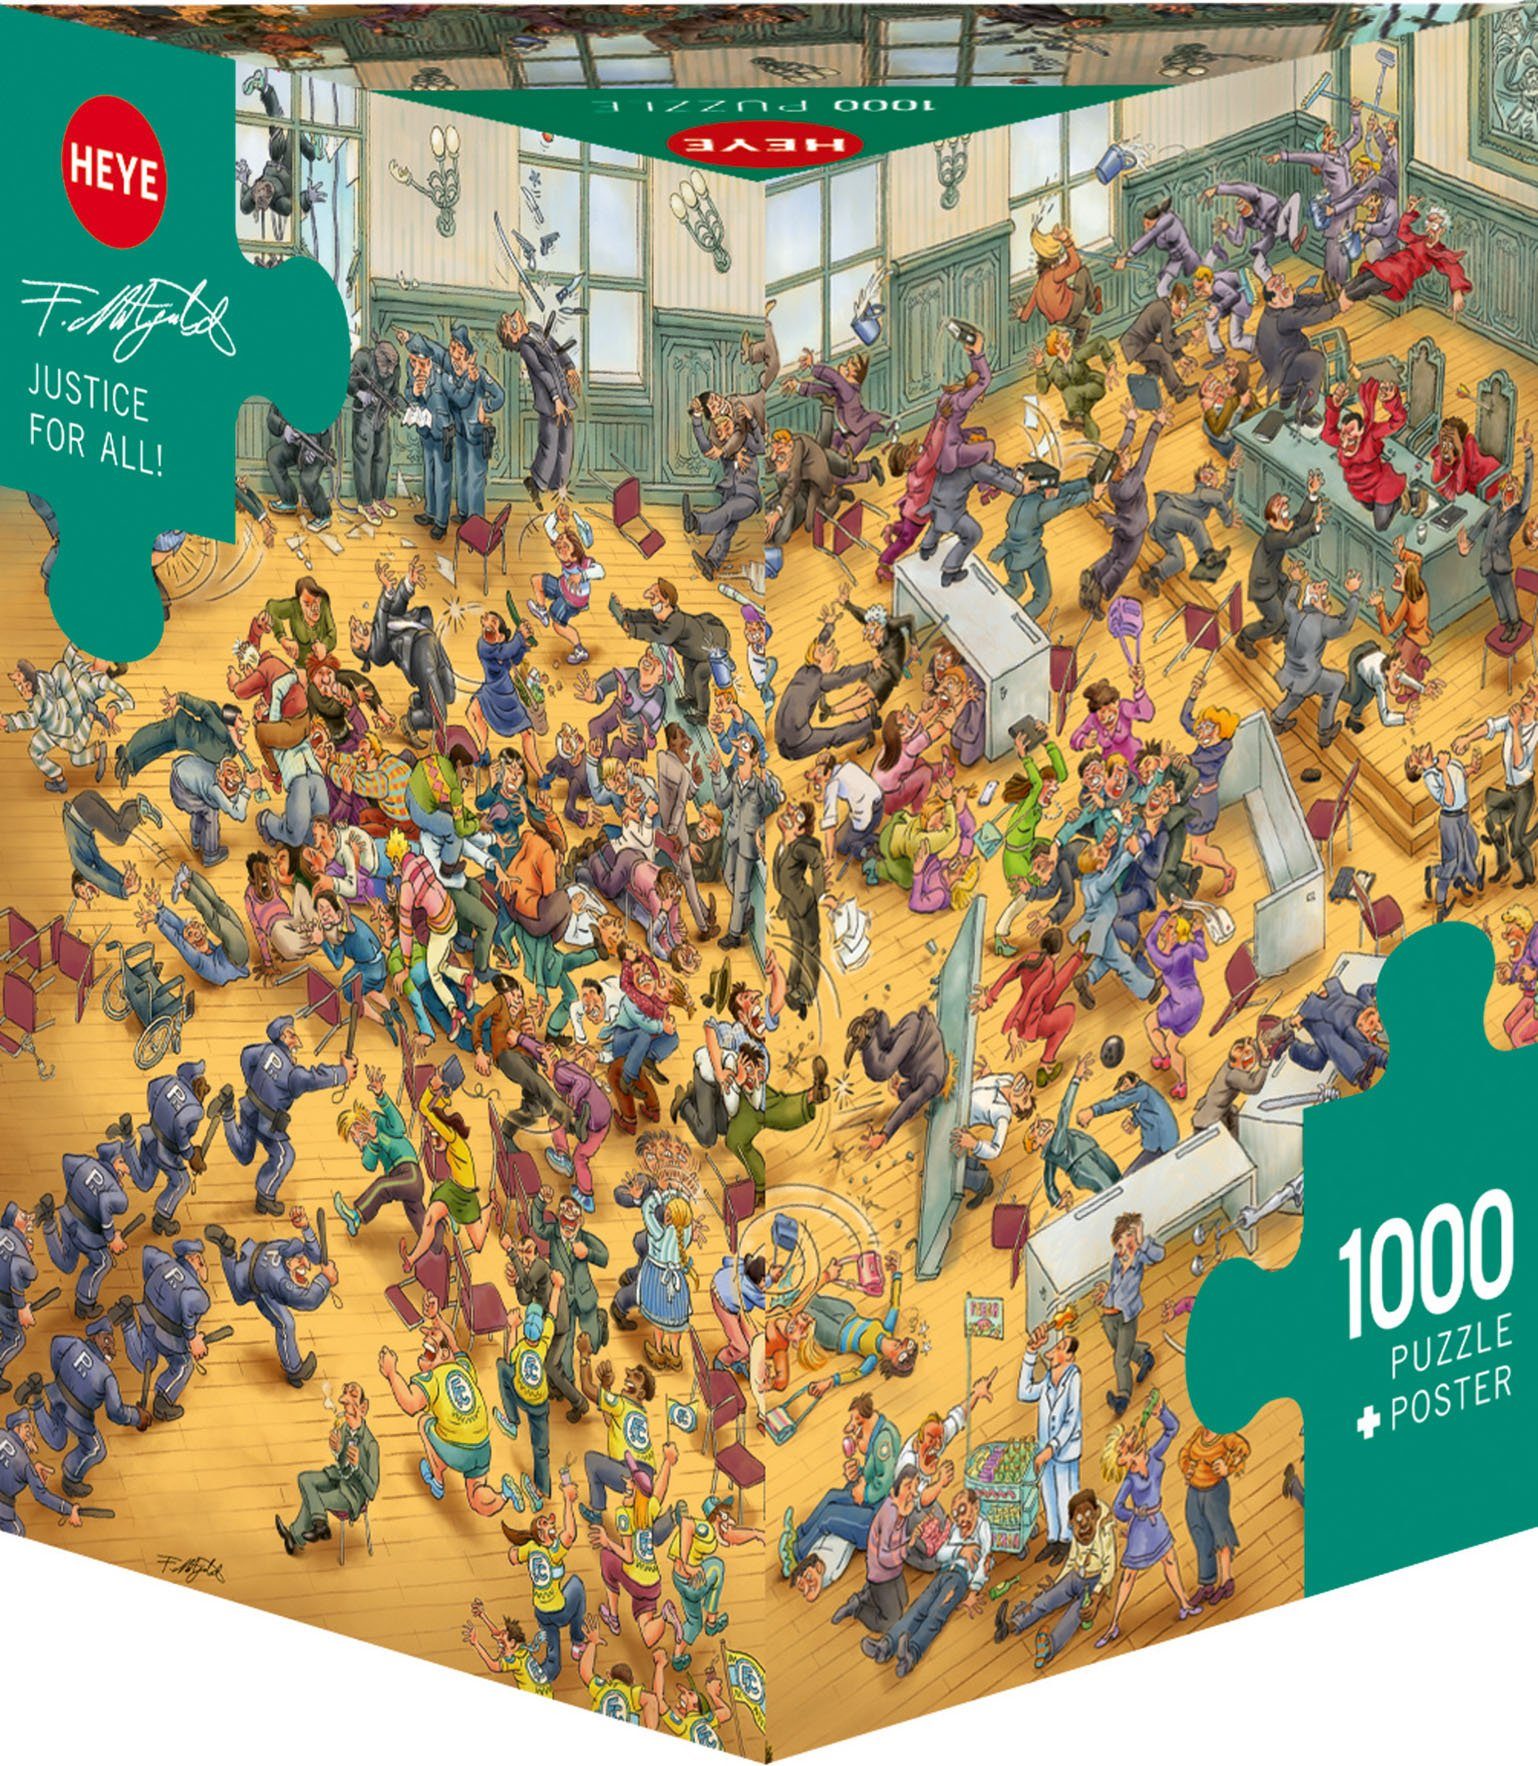 HEYE Puzzle Justice For All! Mitgutsch, 1000 Puzzleteile, Made in Europe